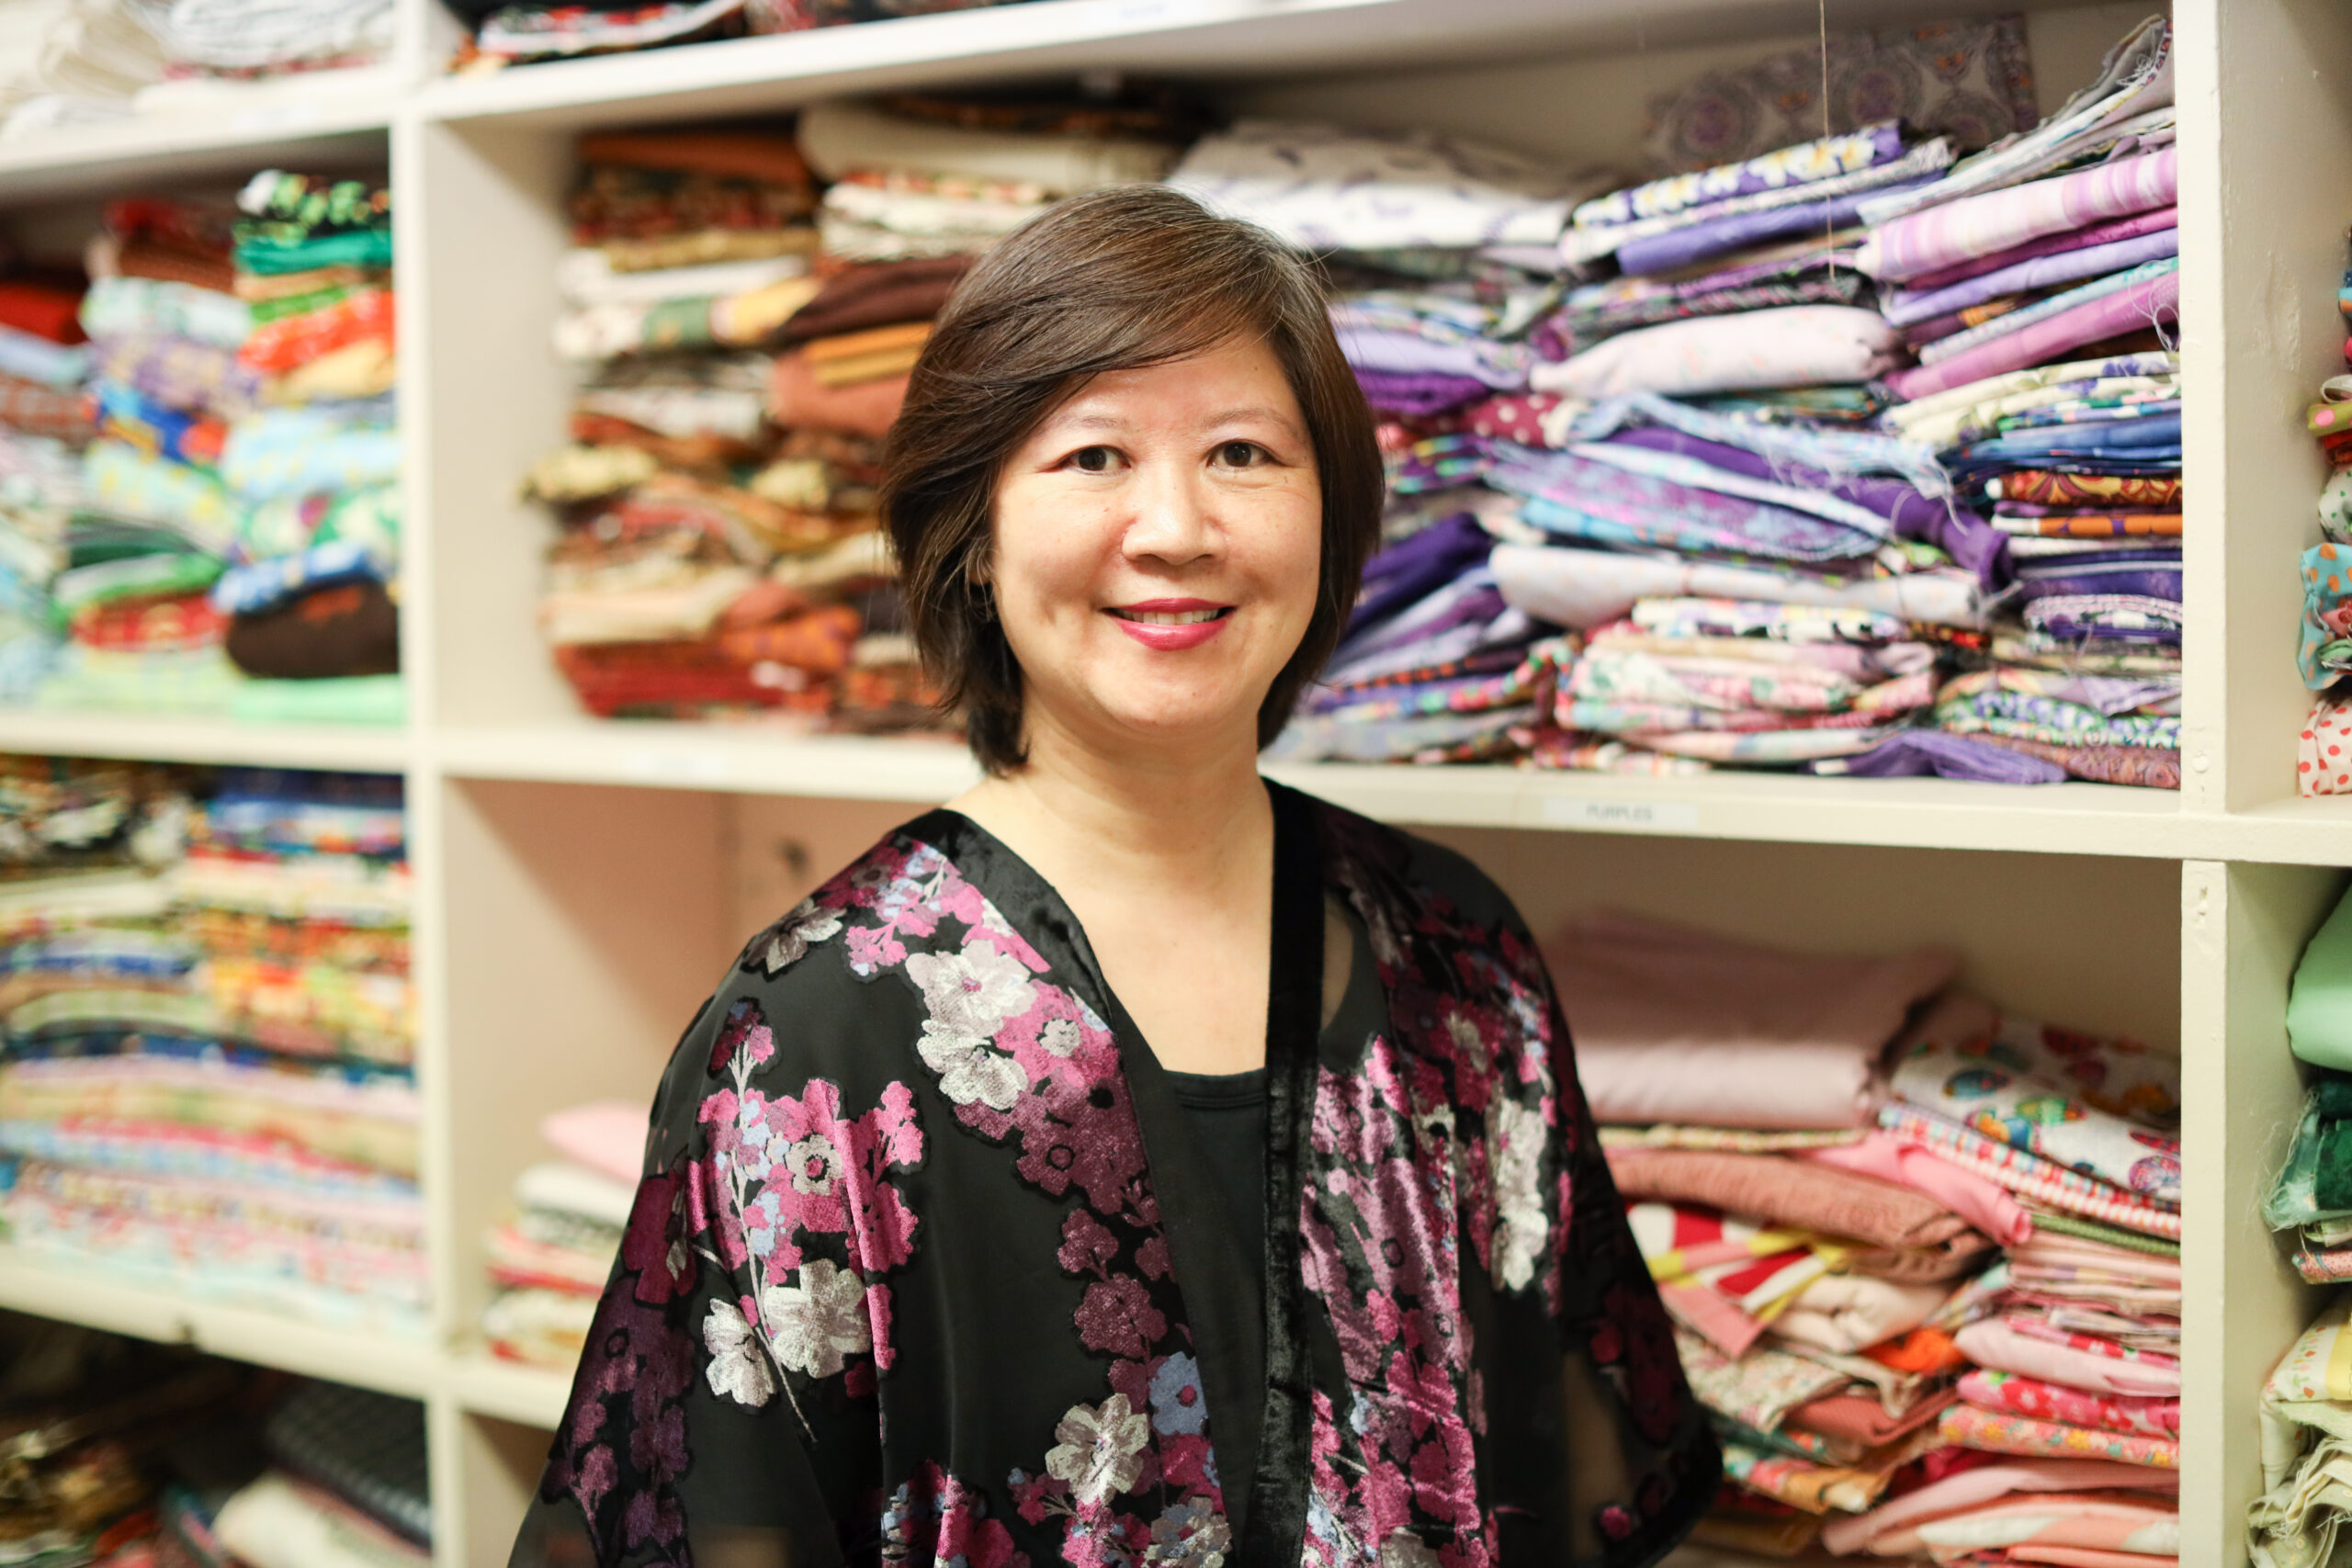 Ming-Ming wearing a black top with pink and white flowers standing in front of shelves of colored fabric.